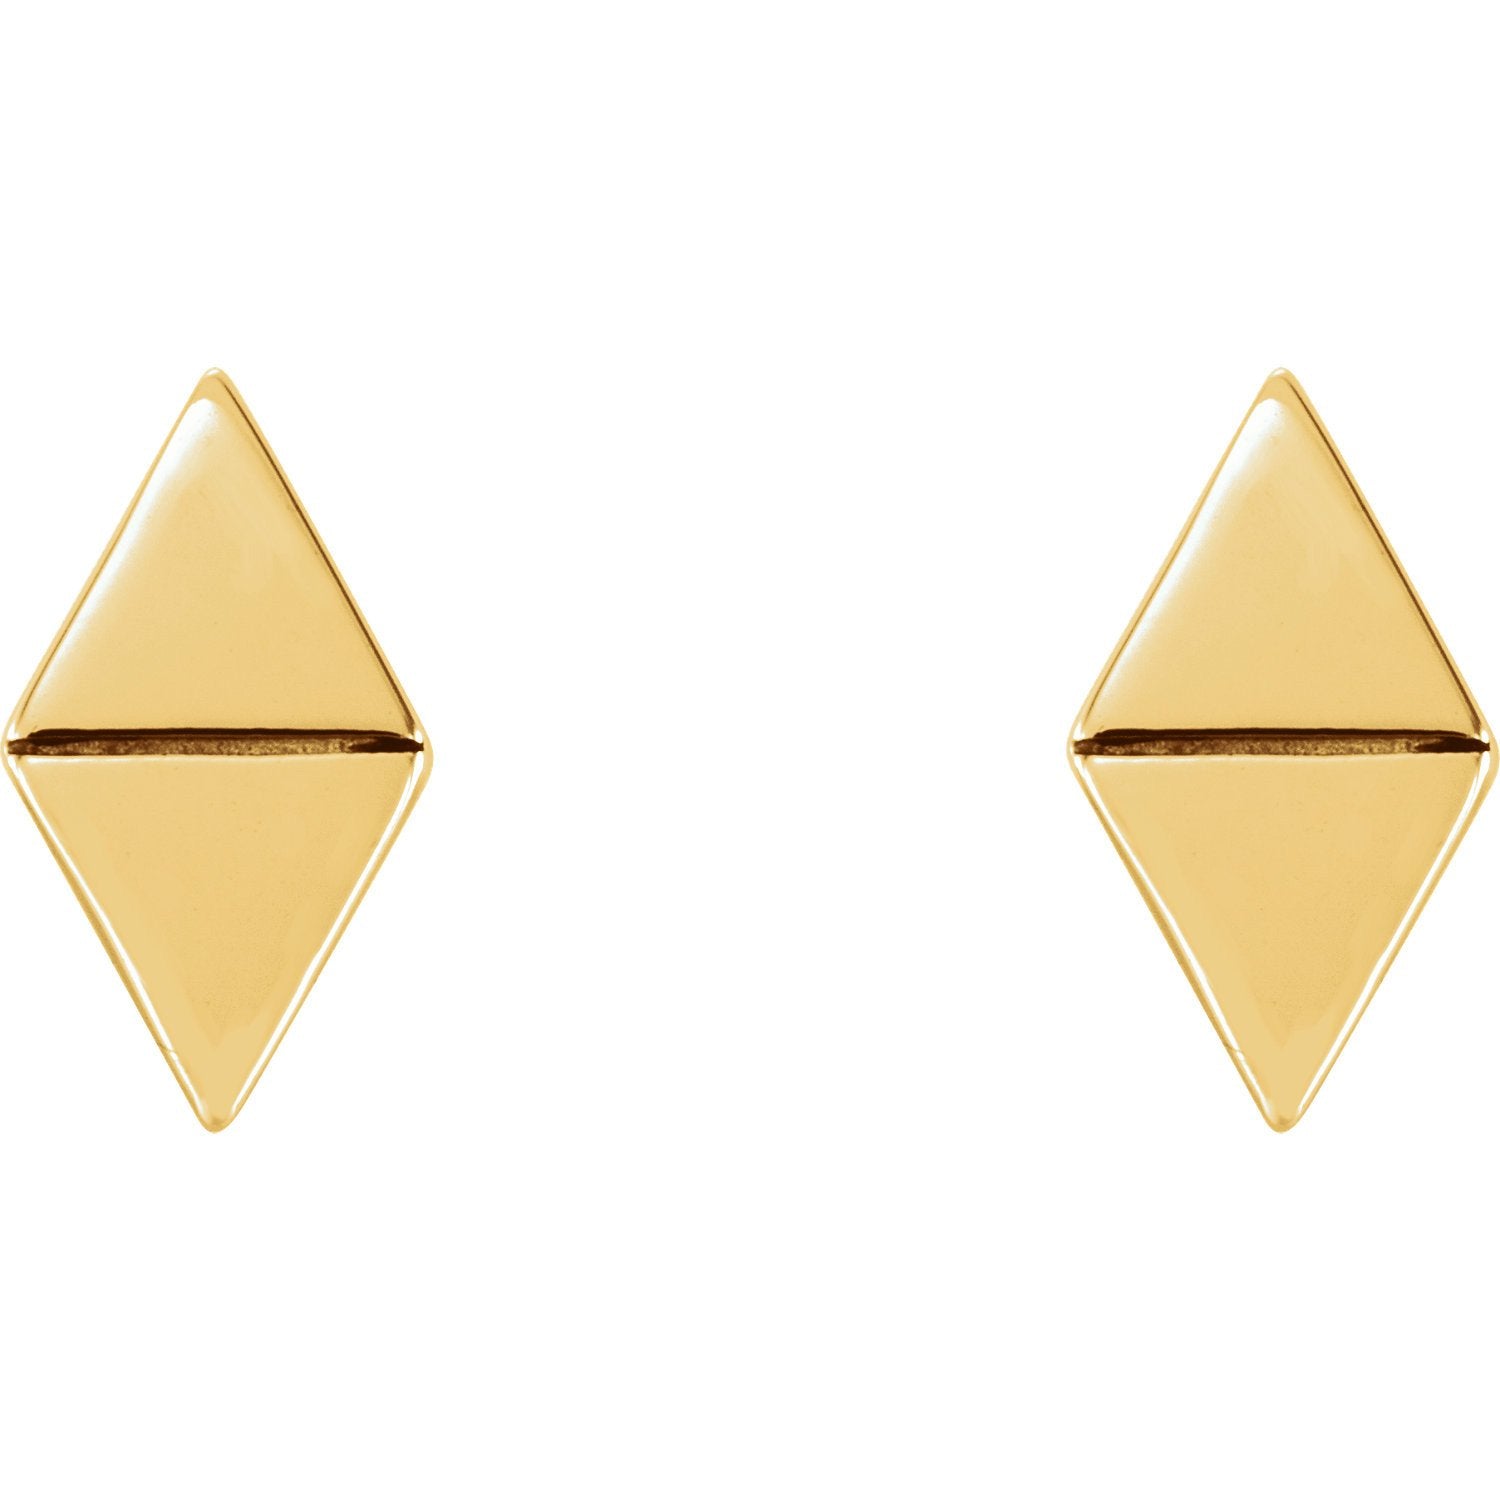 Diamond Shaped Geometric Earrings with Backs - 14K Gold (Y, W or R), Platinum, or Sterling Silver